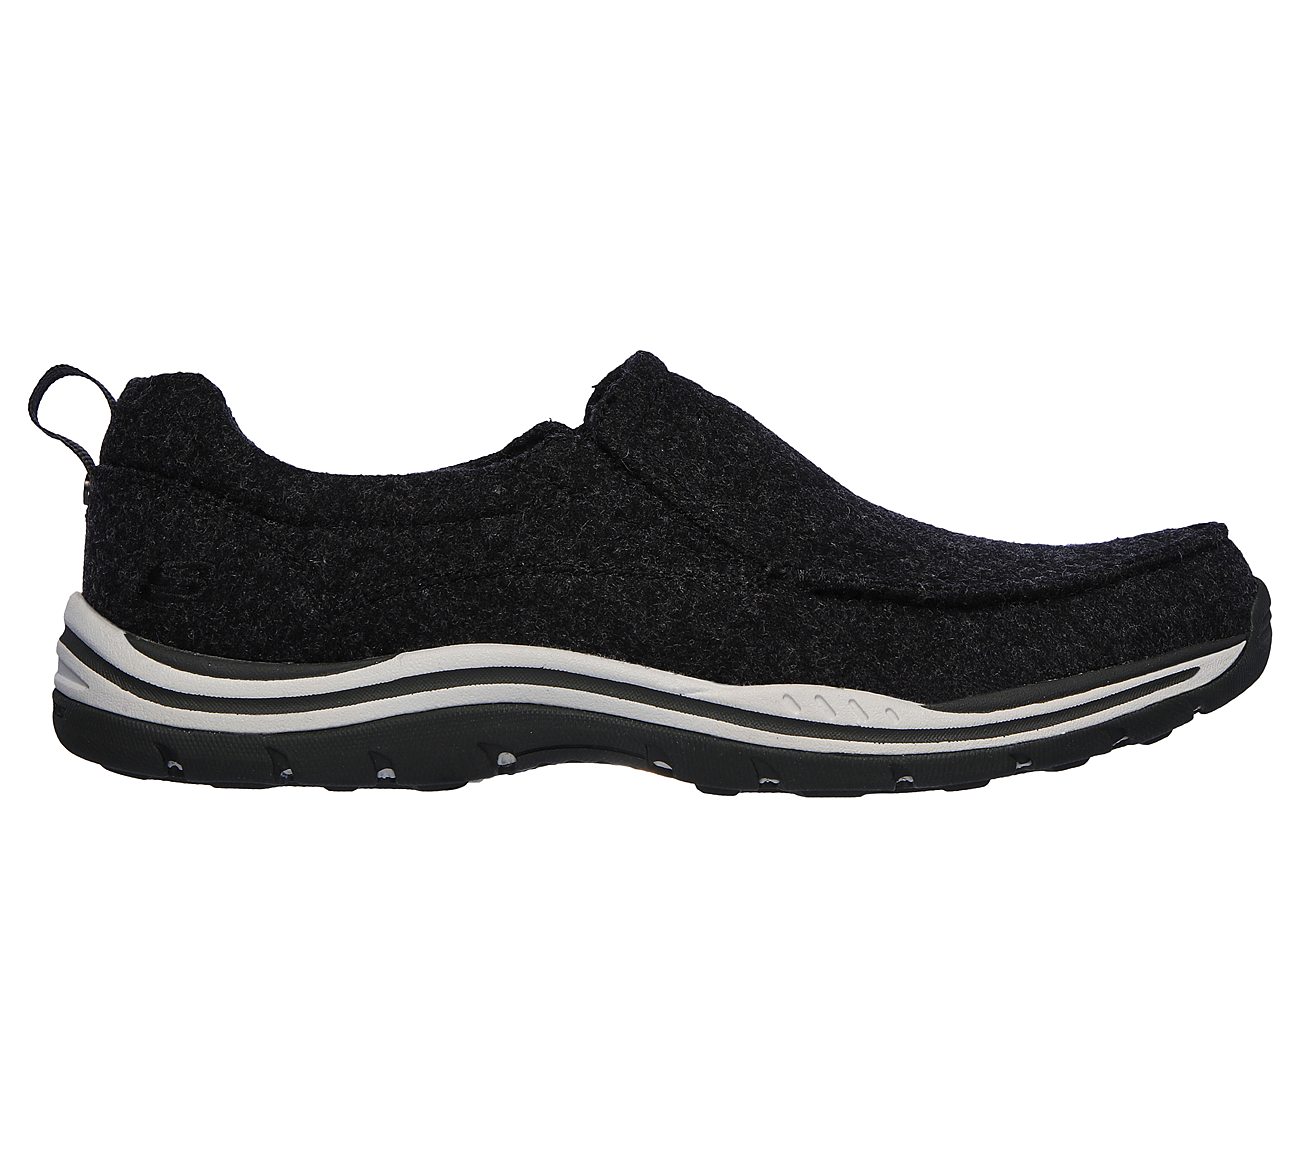 Buy SKECHERS Wash-A-Wools: Expected - Pitzen USA Casuals Shoes